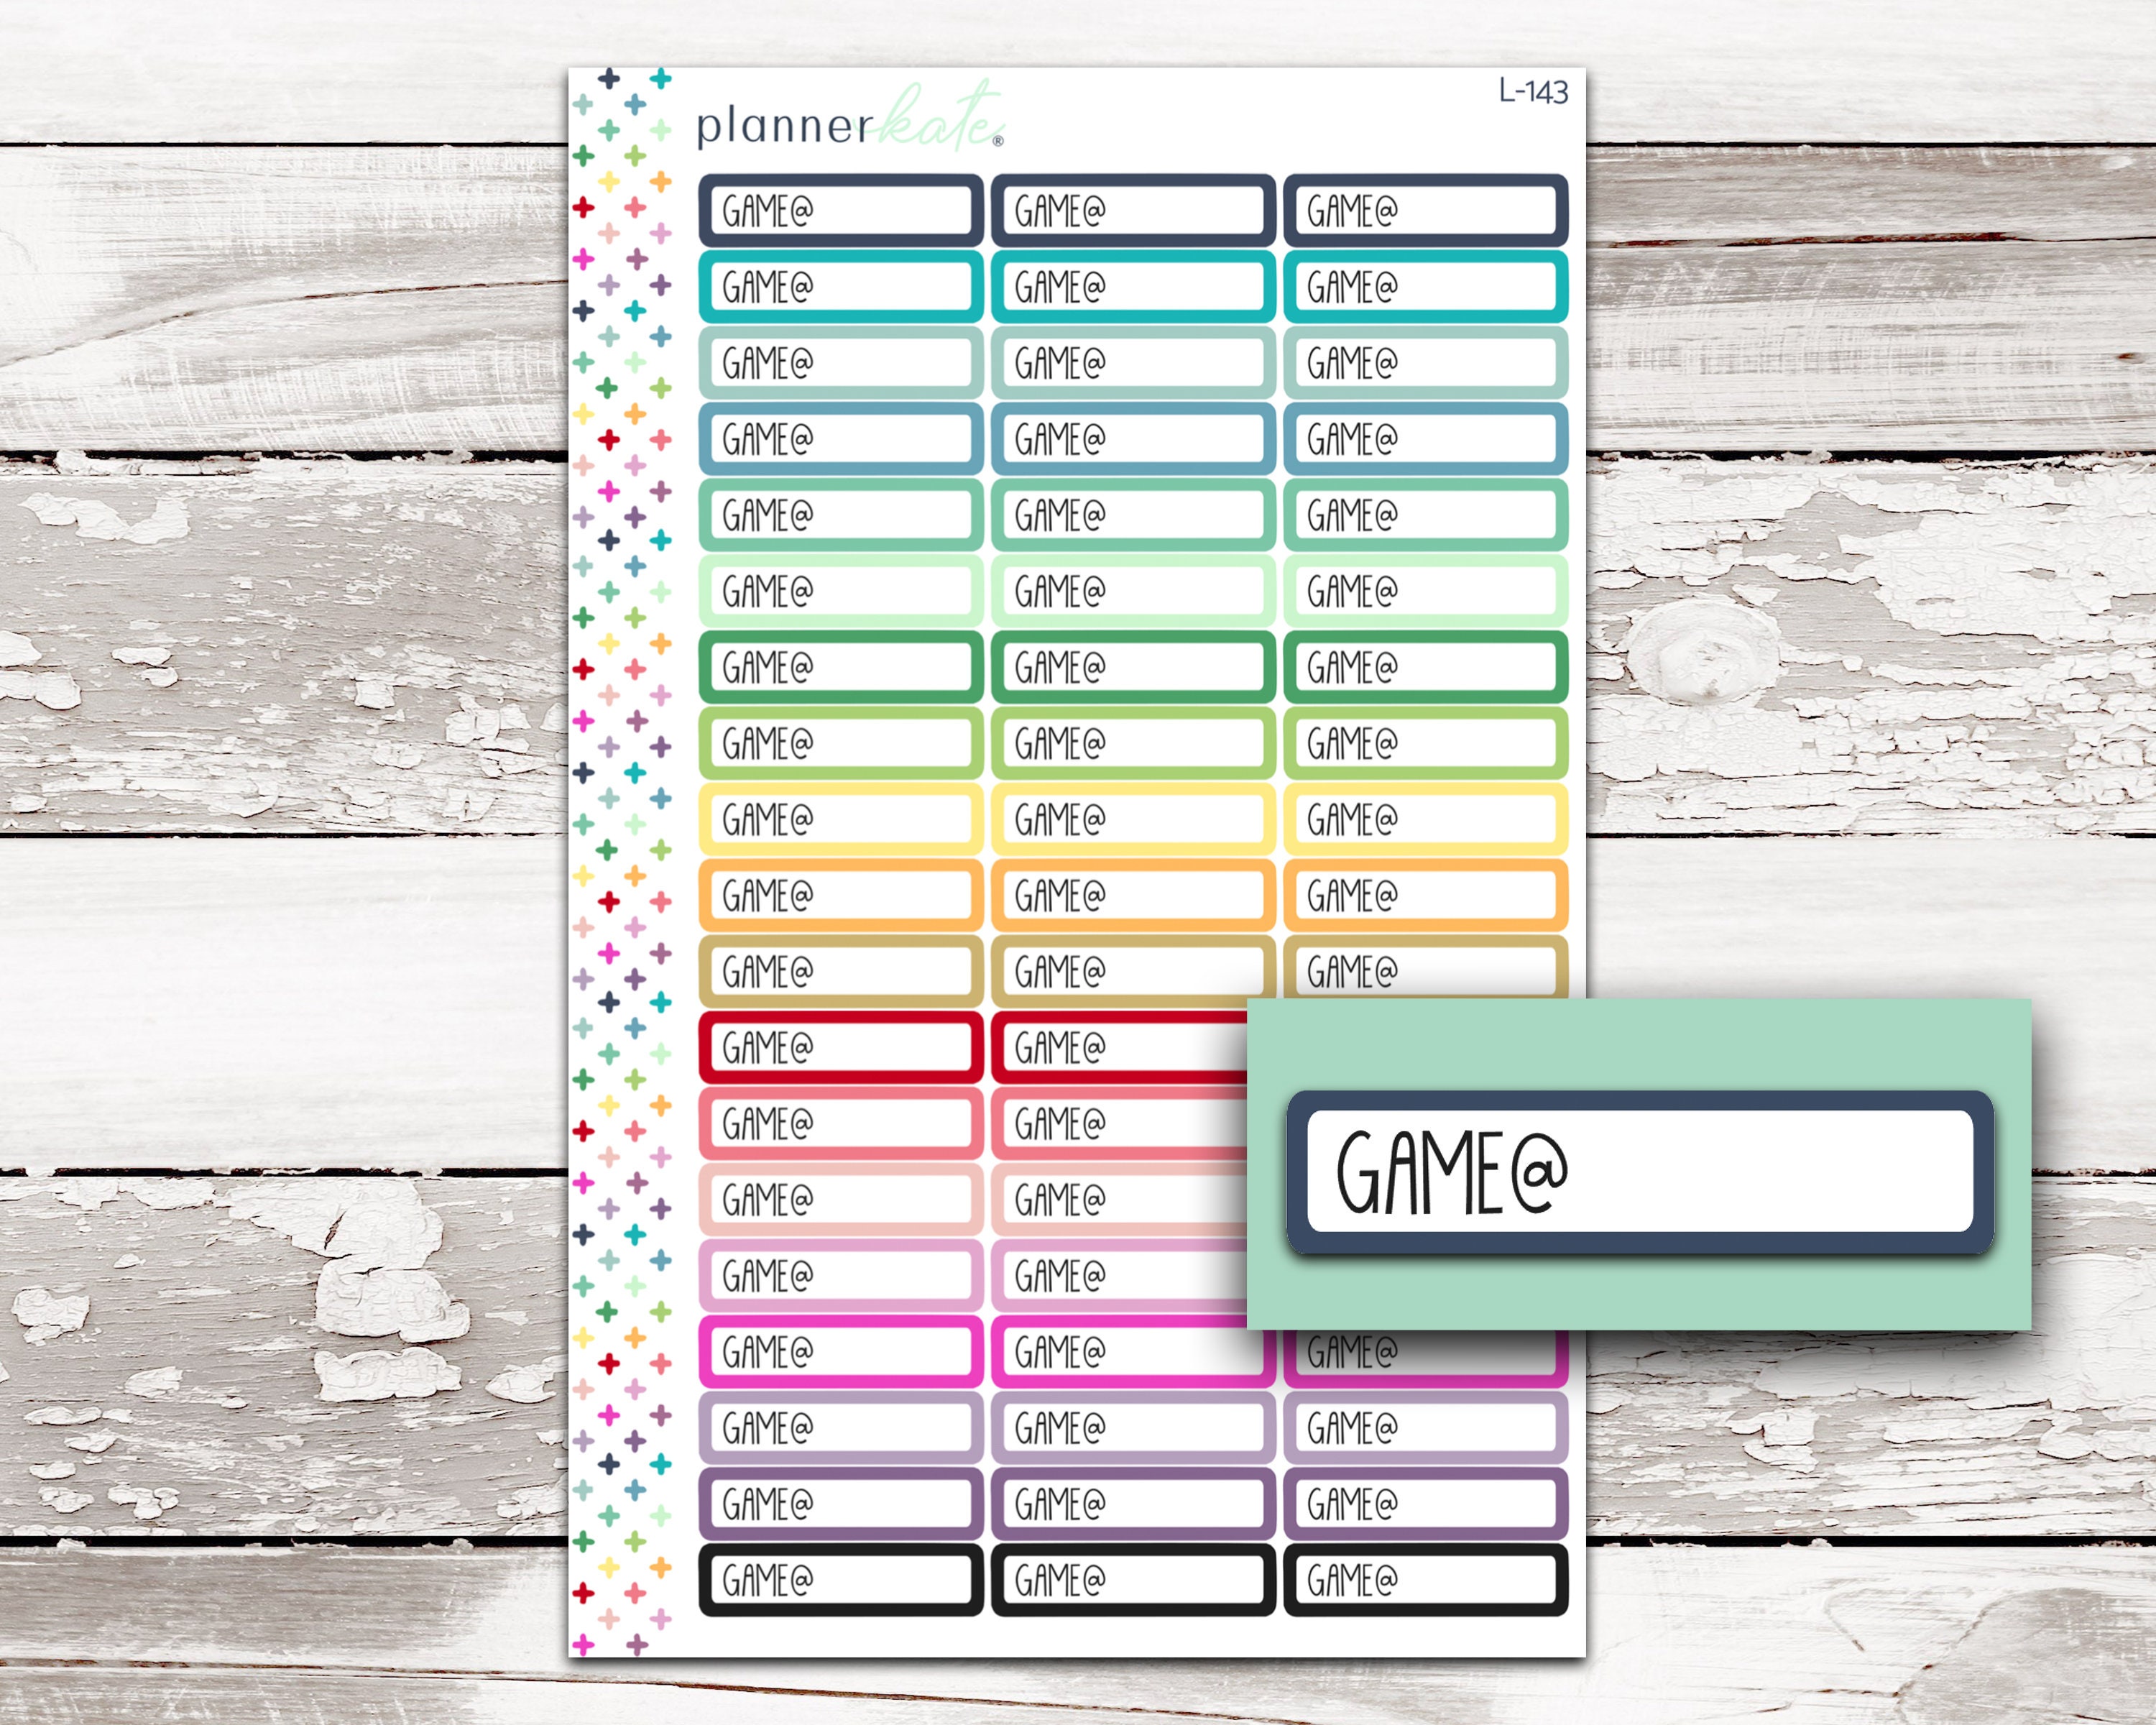 DOODLE-23-26 HOLIDAY Planner Stickers Standard Mini Size S-1569 S